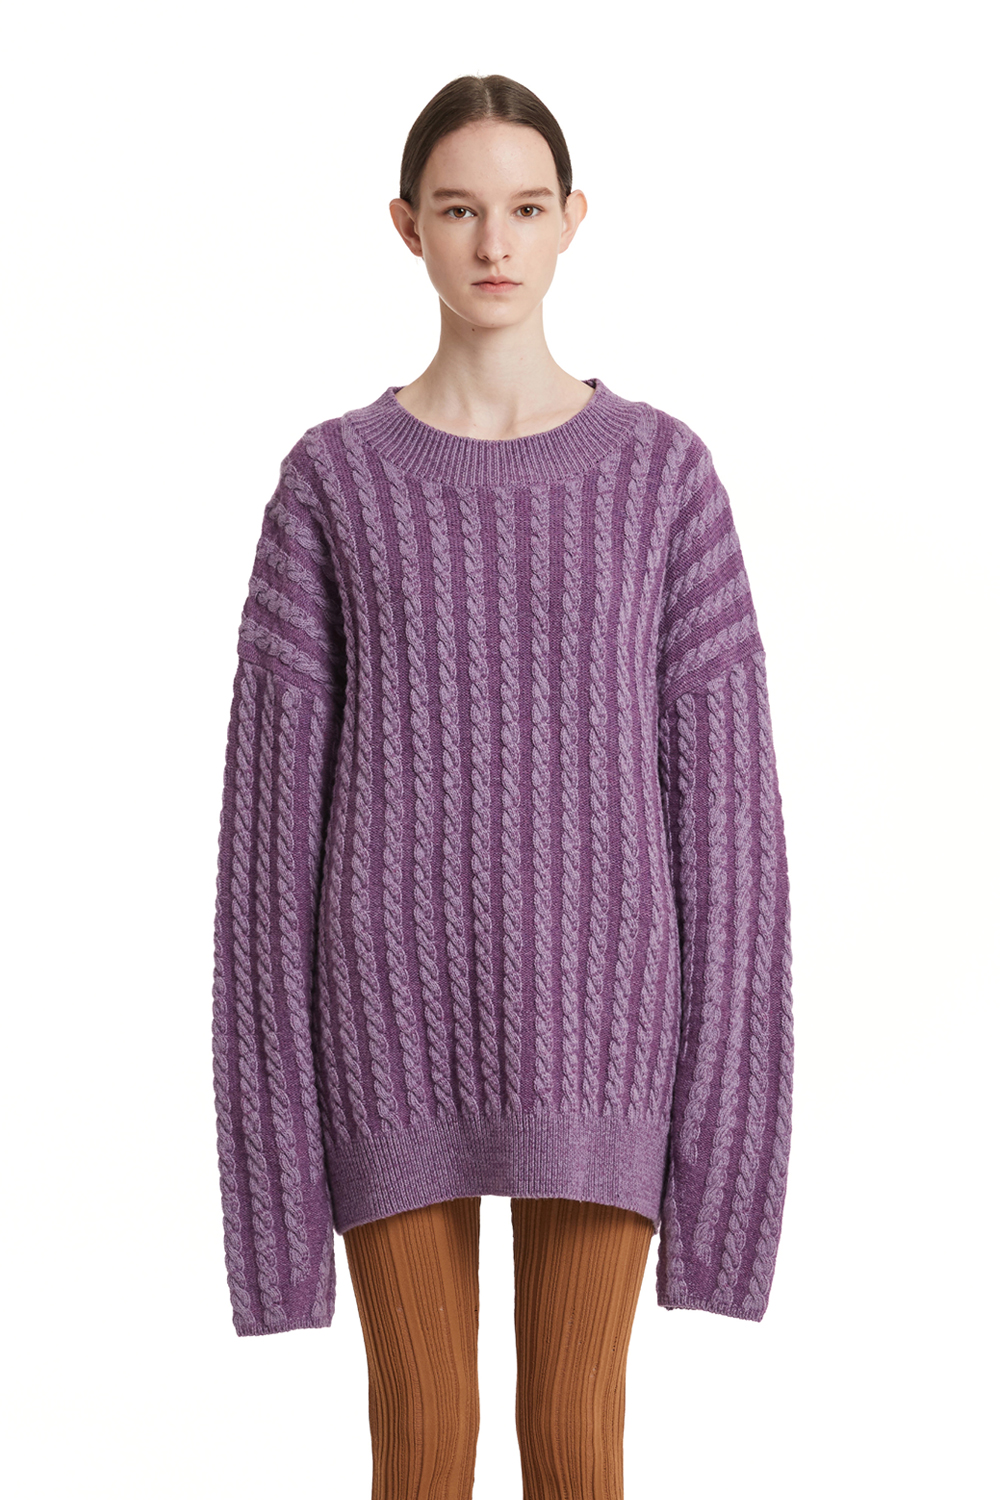 Trunk Project Purple Cable Stripe Knit Sweater